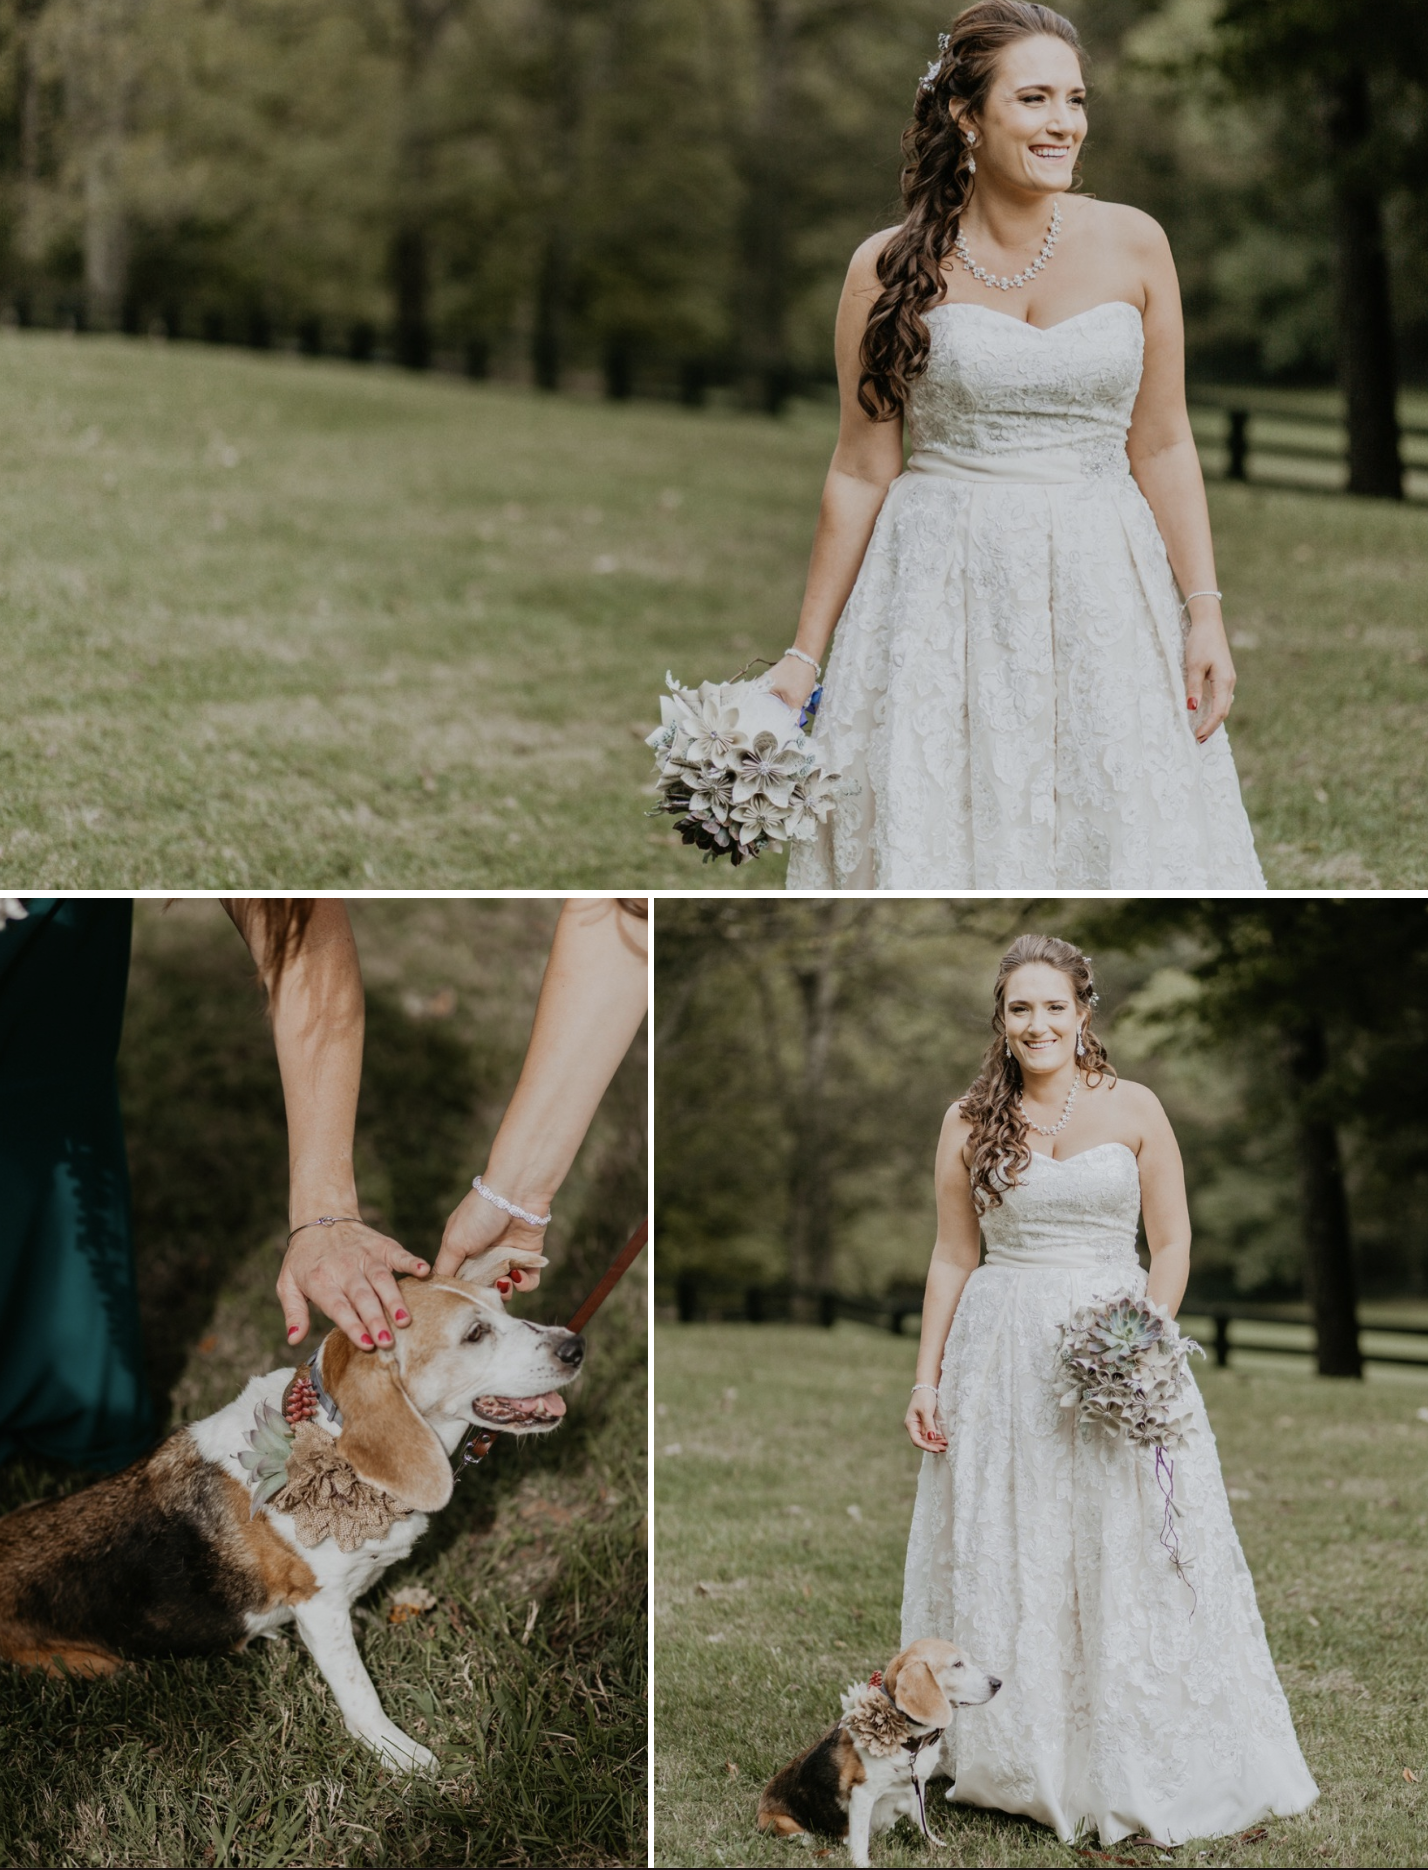 Michelle in her wedding dress with her dog.